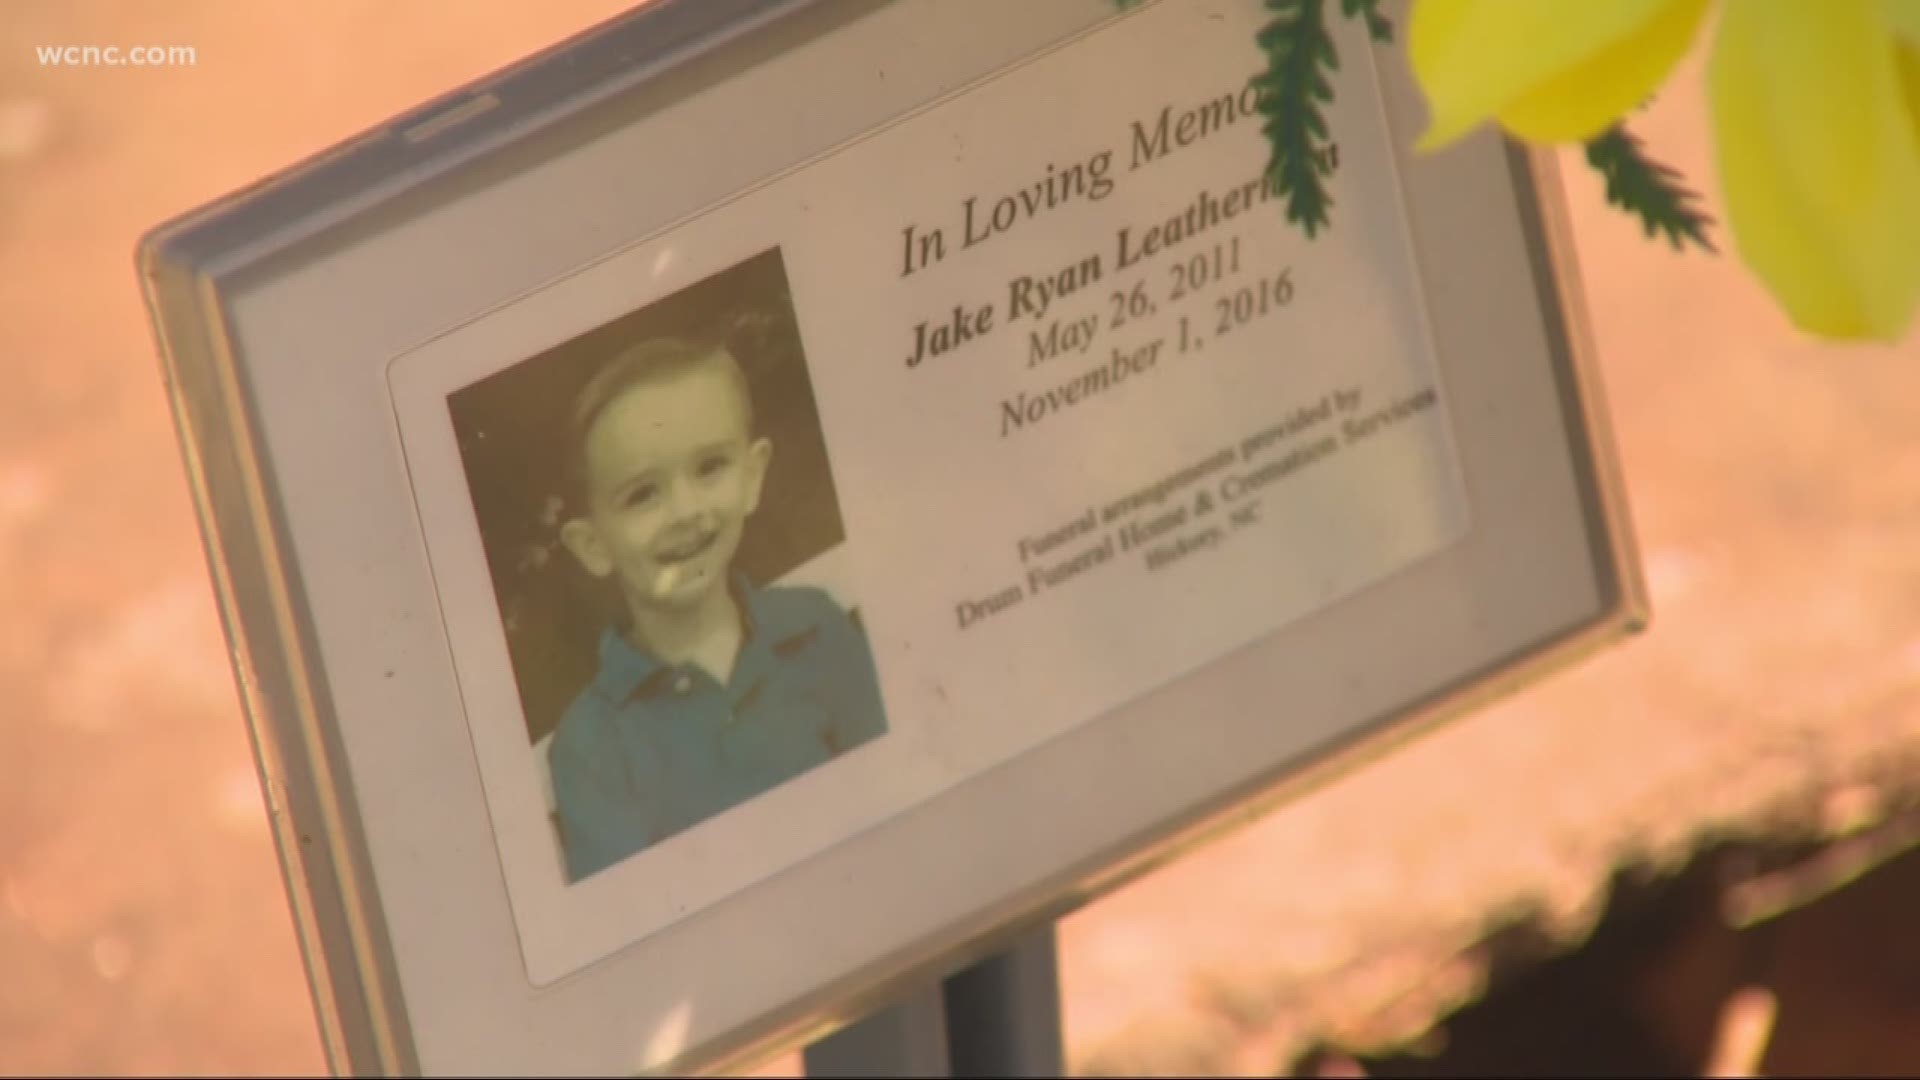 In the back of a Hickory cemetery, a 5-year-old boy who lost his battle with cancer was laid to rest. But instead of a grave marker for Jake Leatherman, there's just mud and a plywood slab.